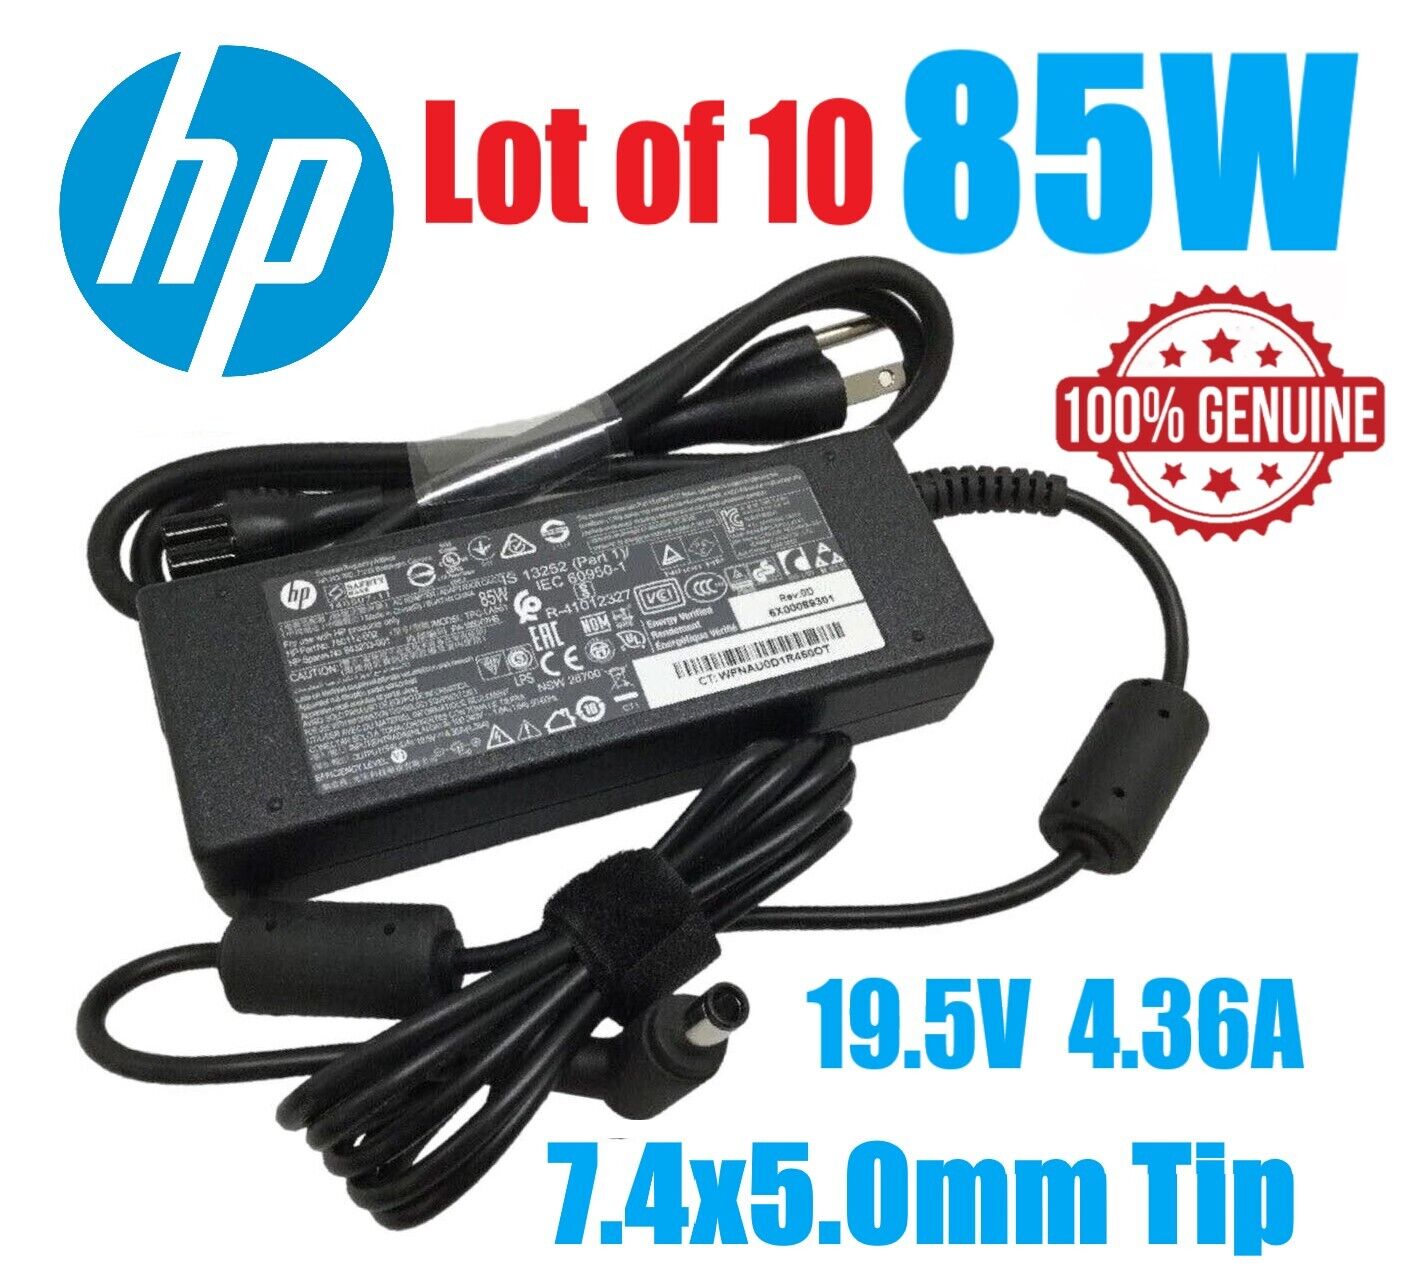 Lot of 10 OEM HP Thin Client T520 T630 T730 85W AC Adapter Charger 7.4x5.0mm Tip